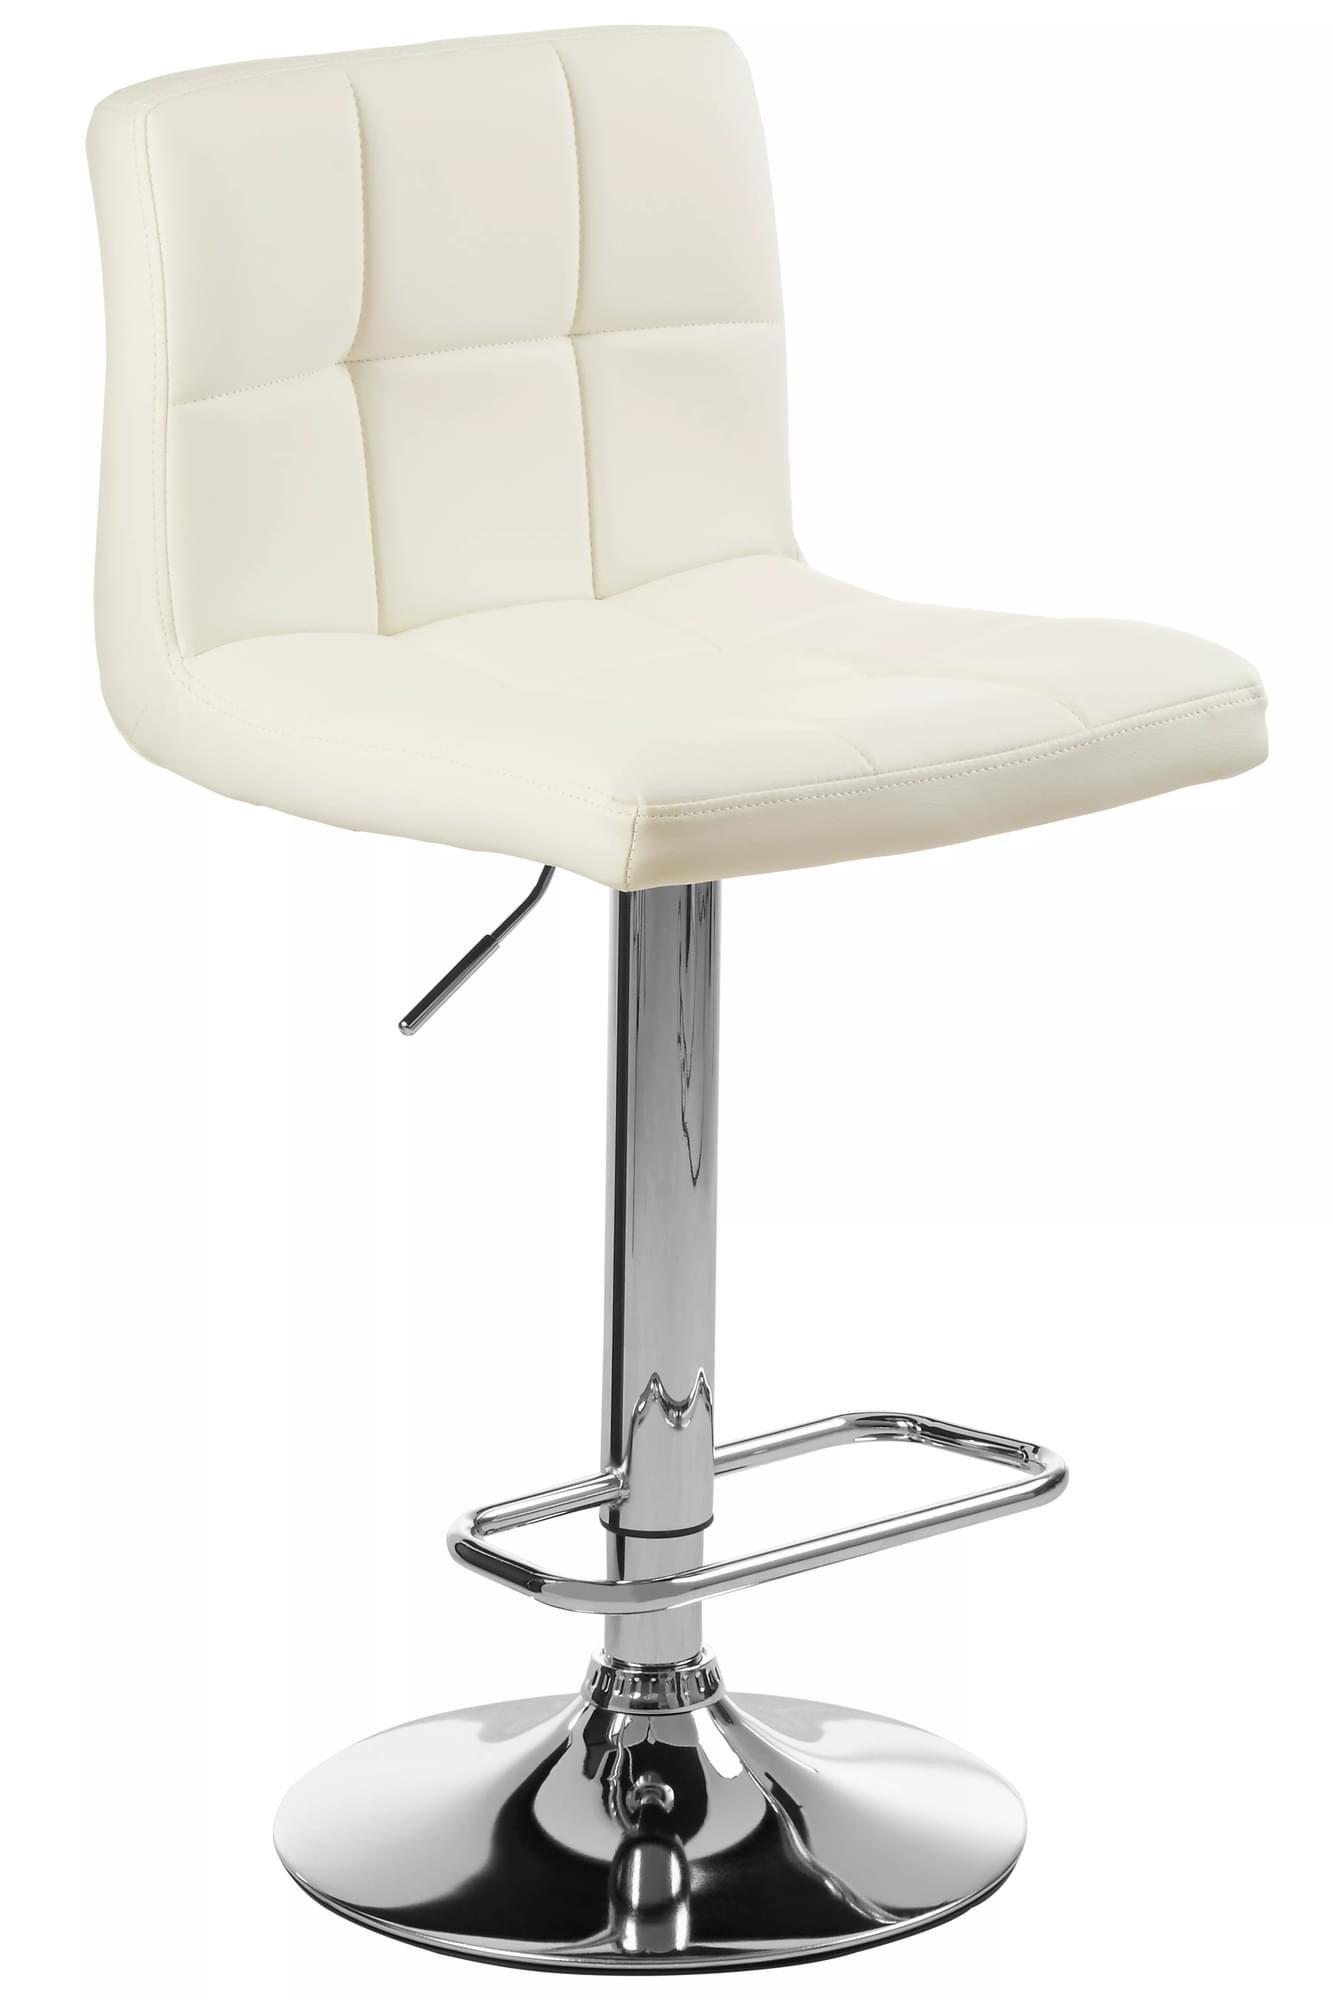 Interiors by Premier Baina Quilted Chrome Base Bar Stool